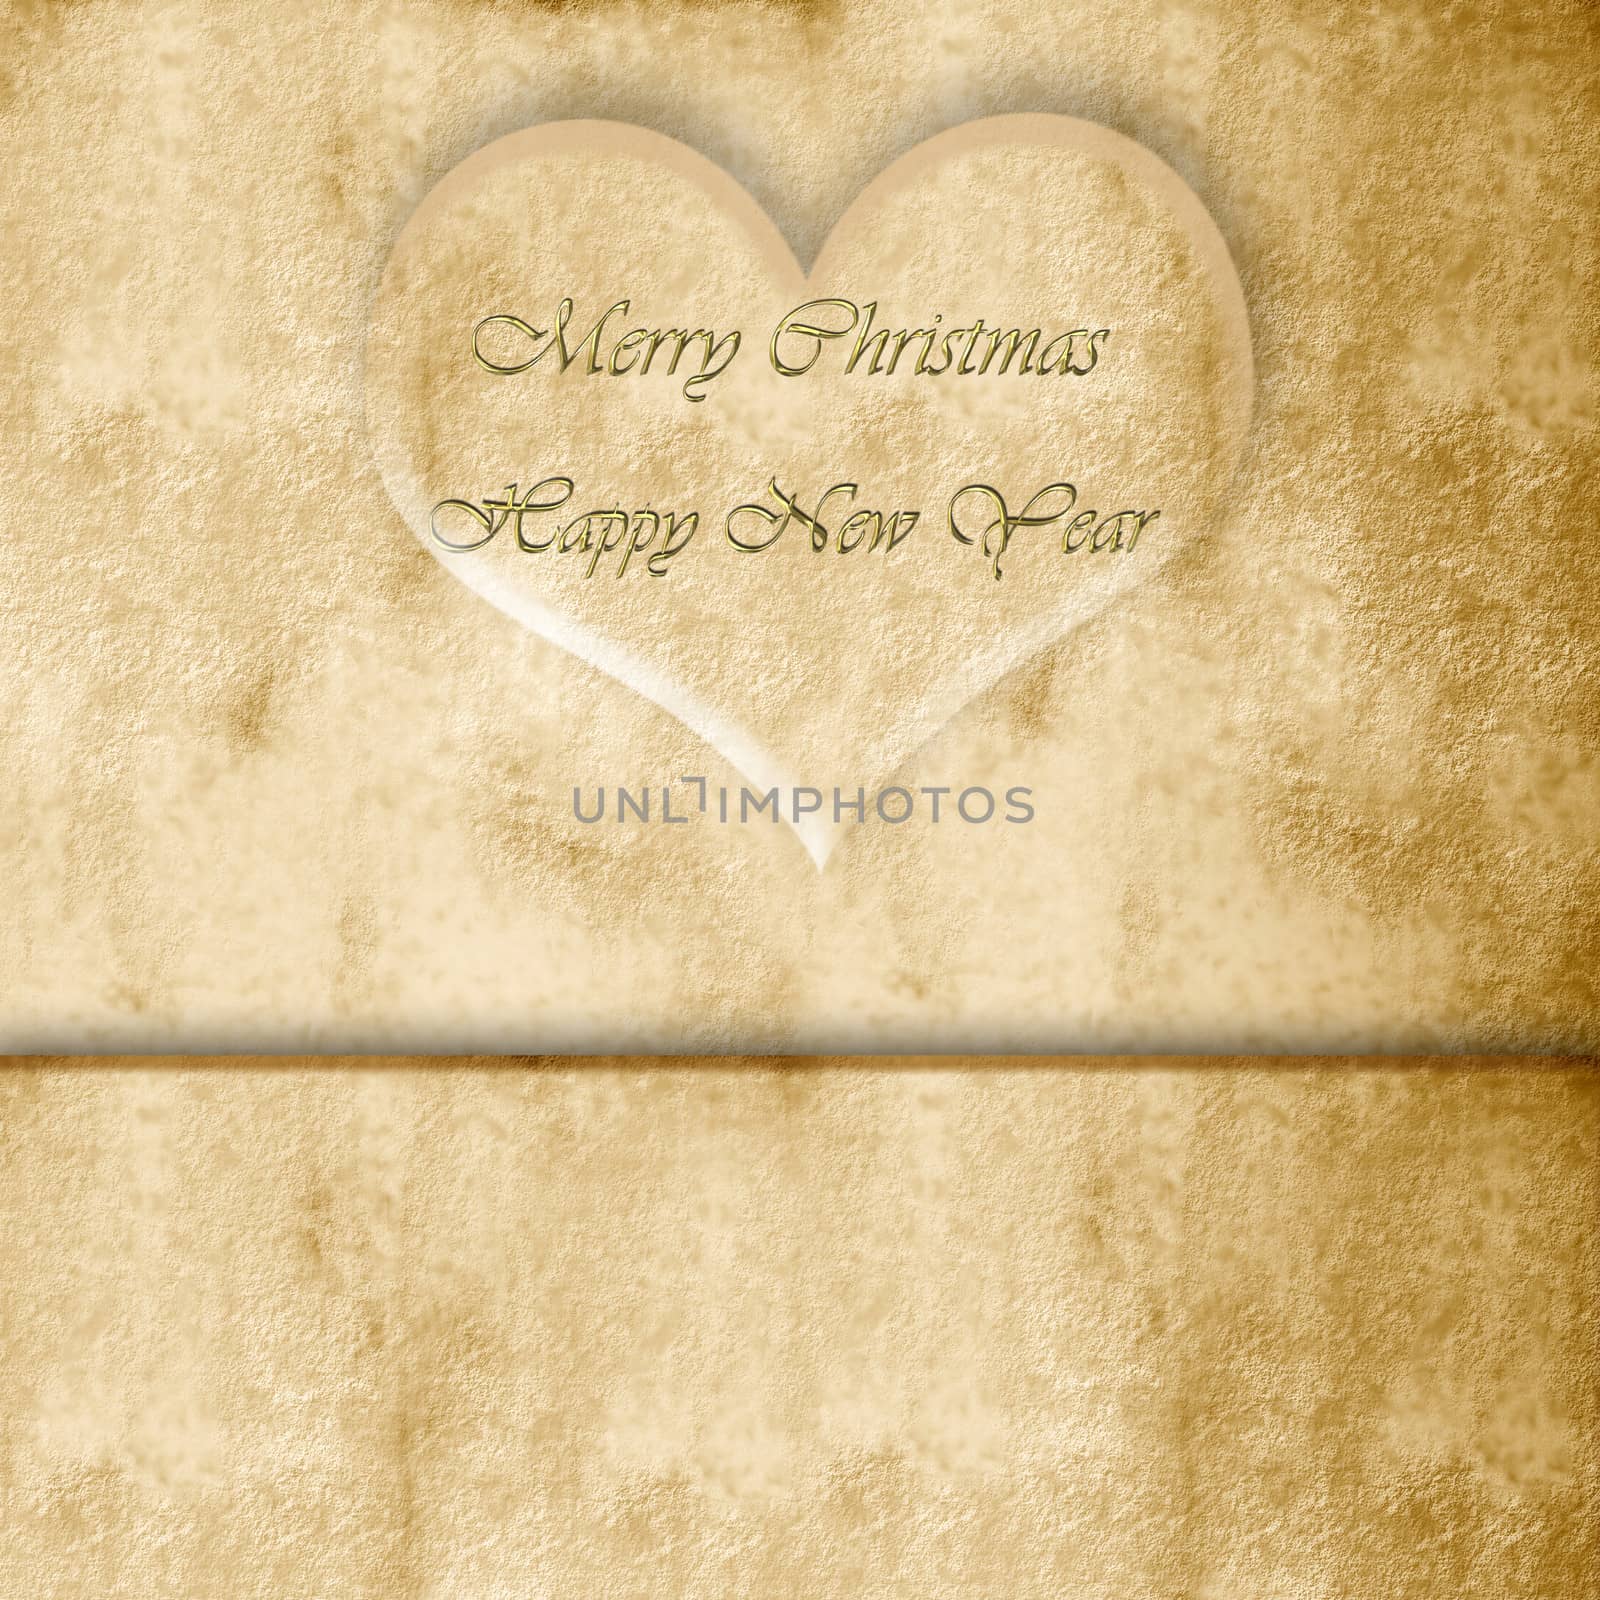 simple Christmas greeting card heart Christmas transparent and empty parchment background for writing